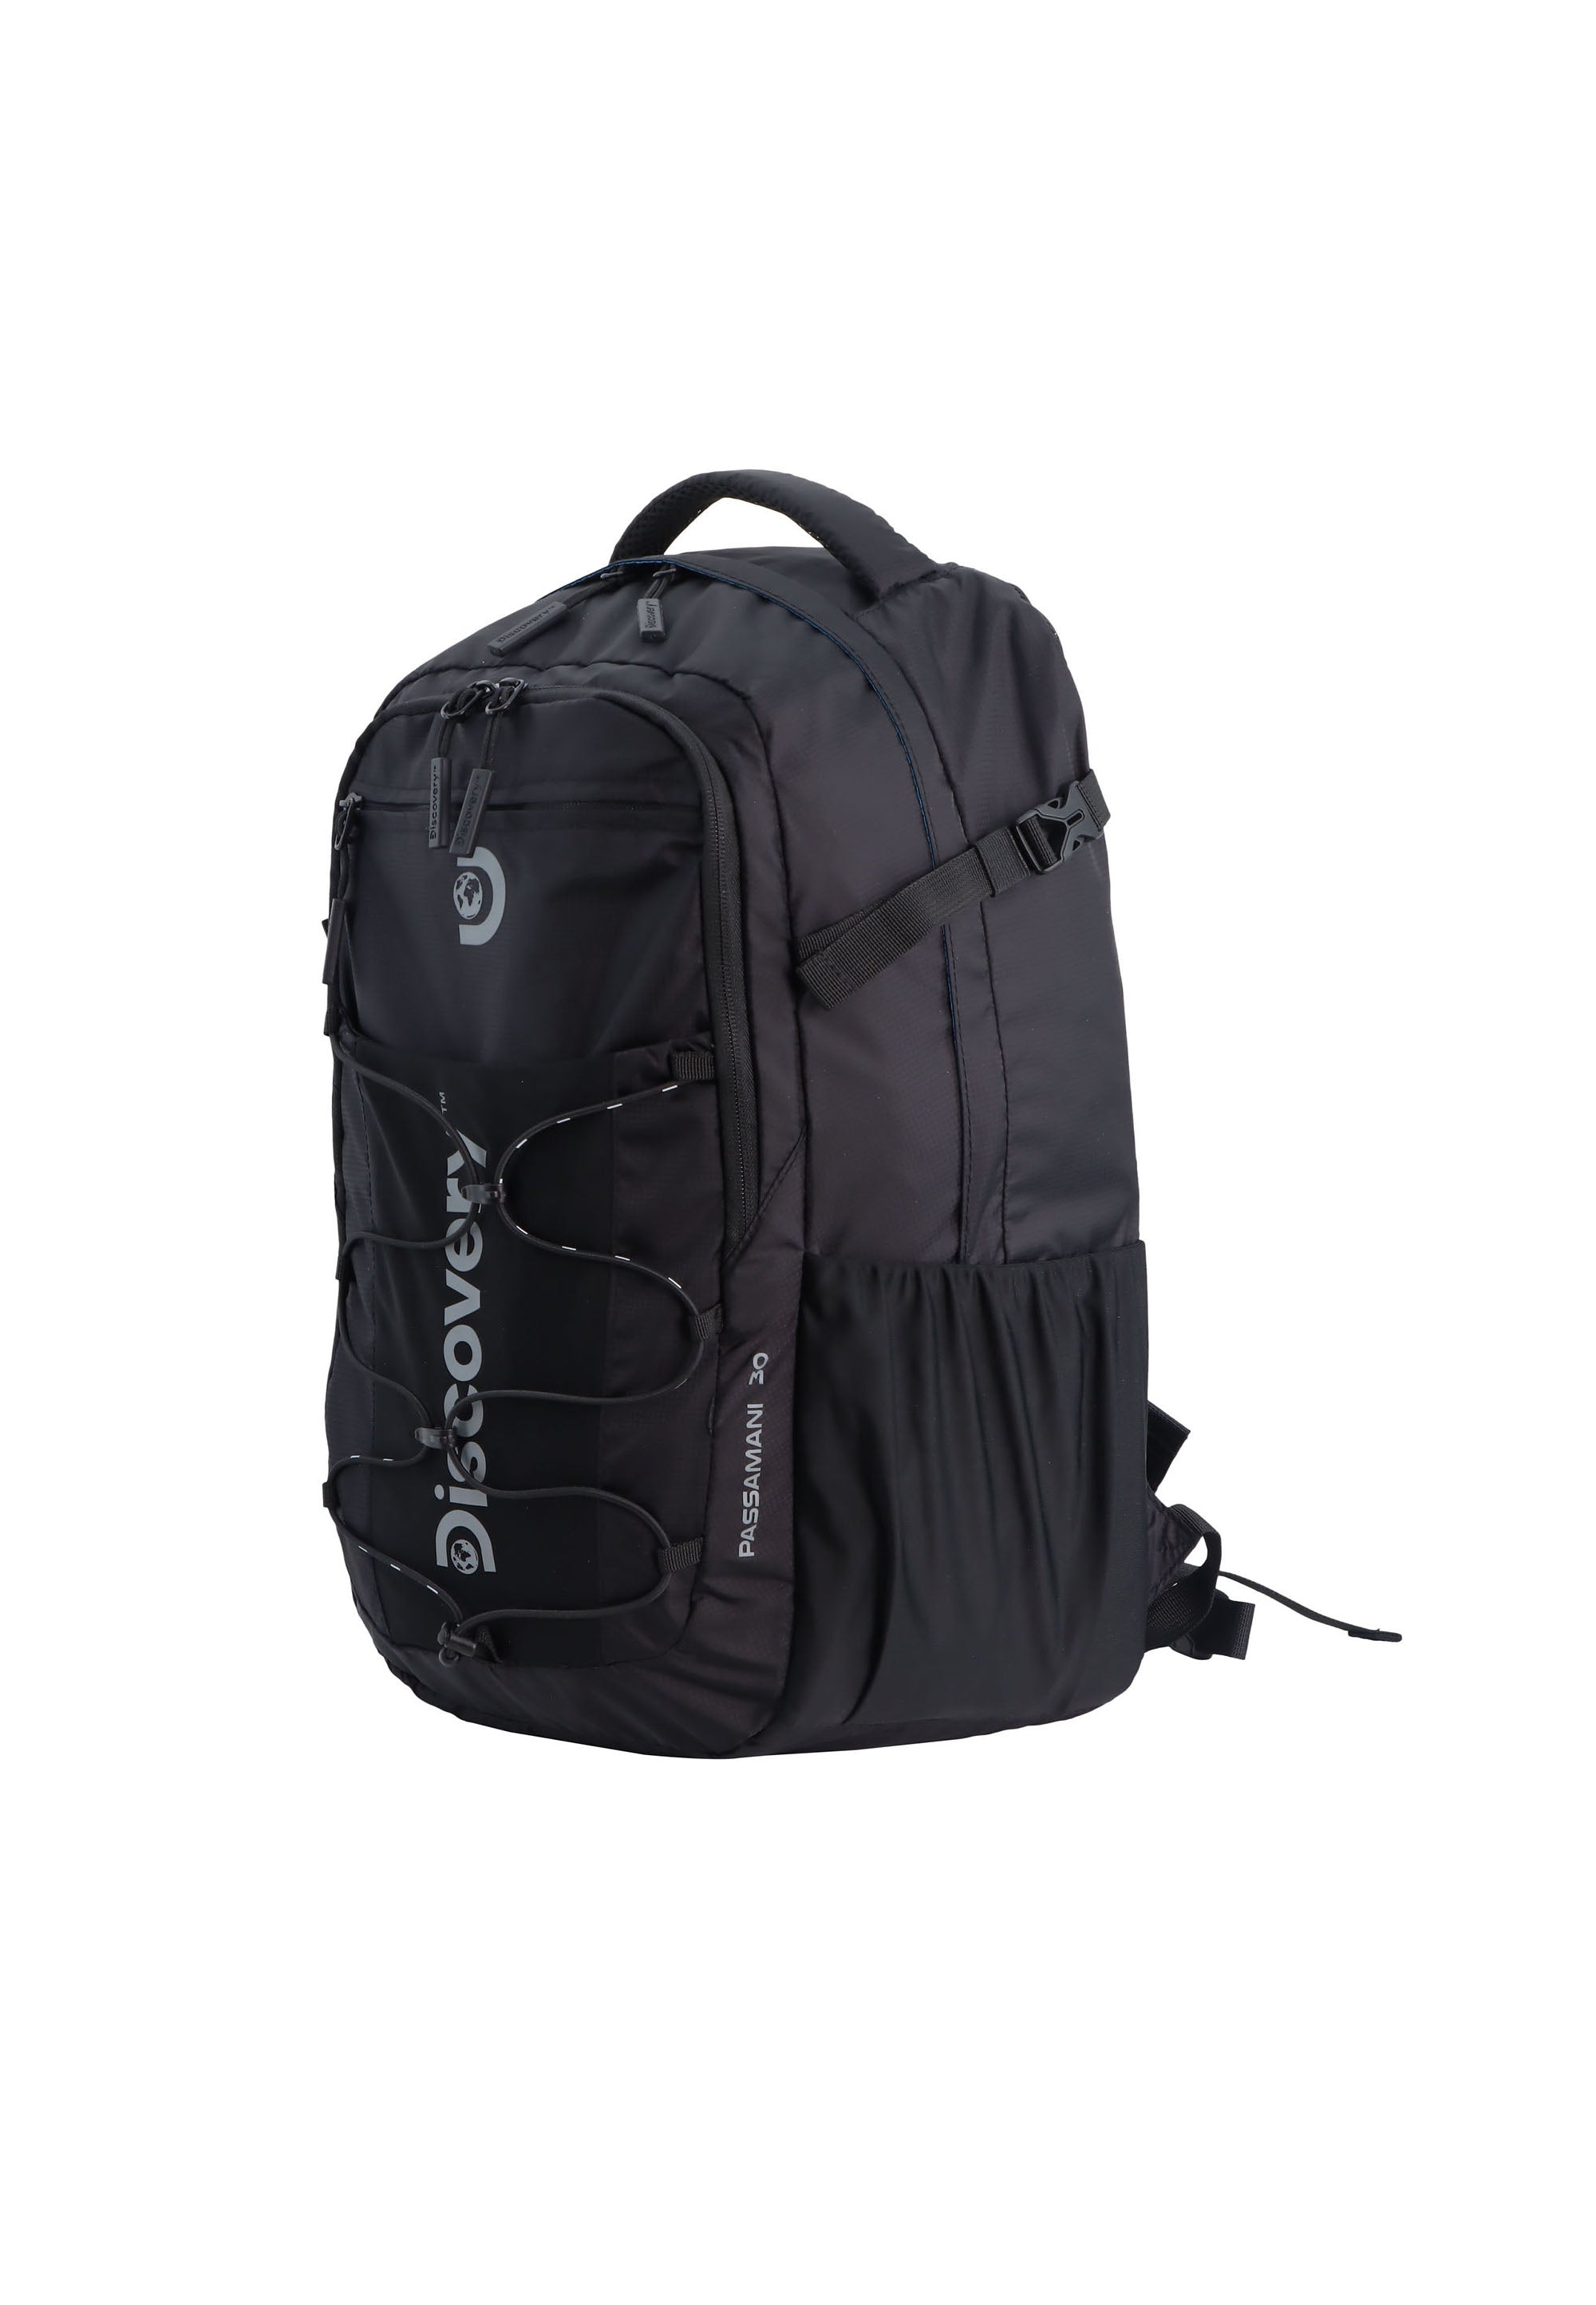 Discovery - Outdoor Rucksack - 30L